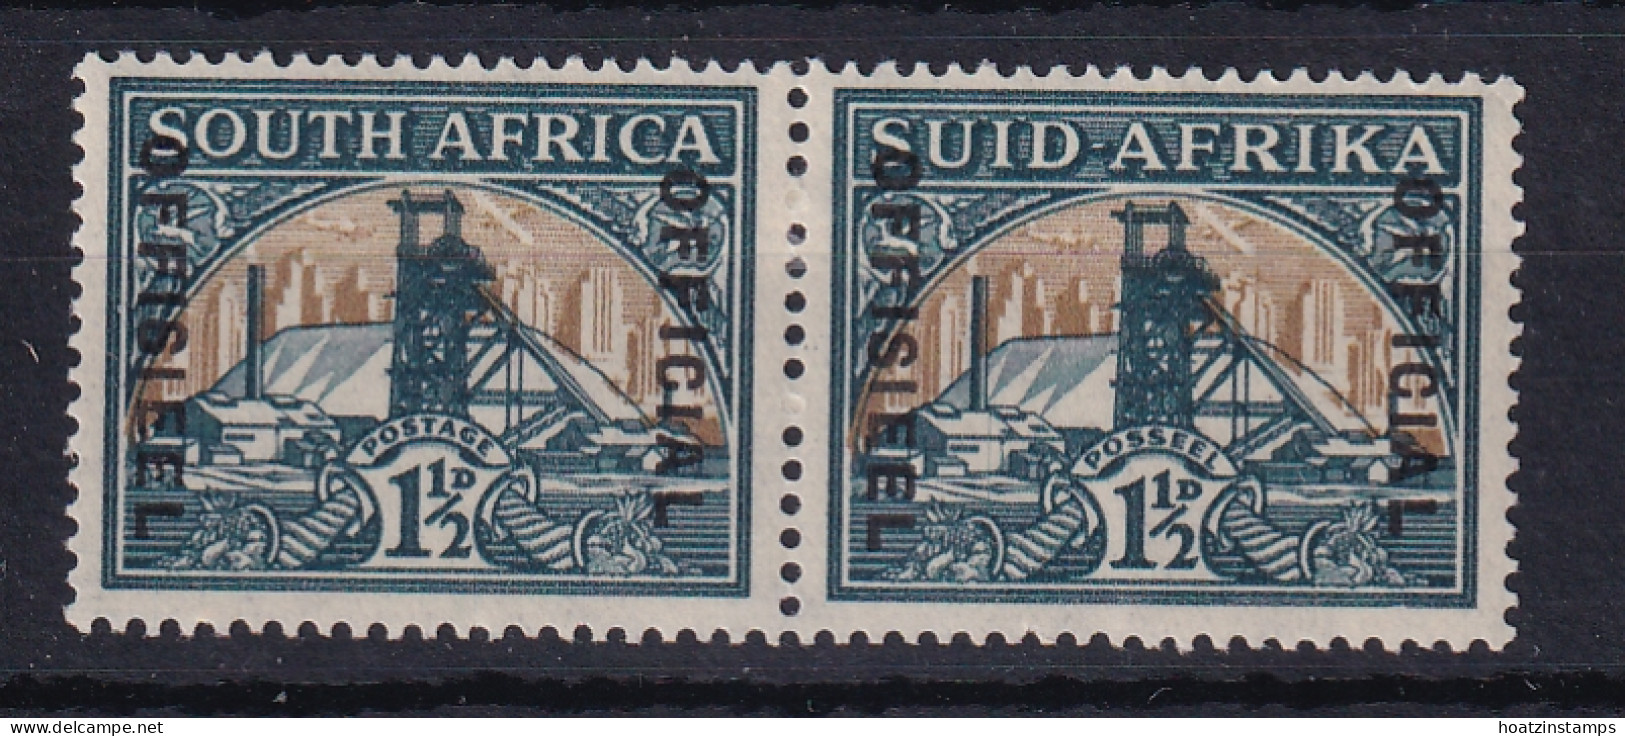 South Africa: 1935/49   Official - Goldmine   SG O22aw    1½d   Green & Bright Gold  [Wmk Upright]  MH Pair - Service